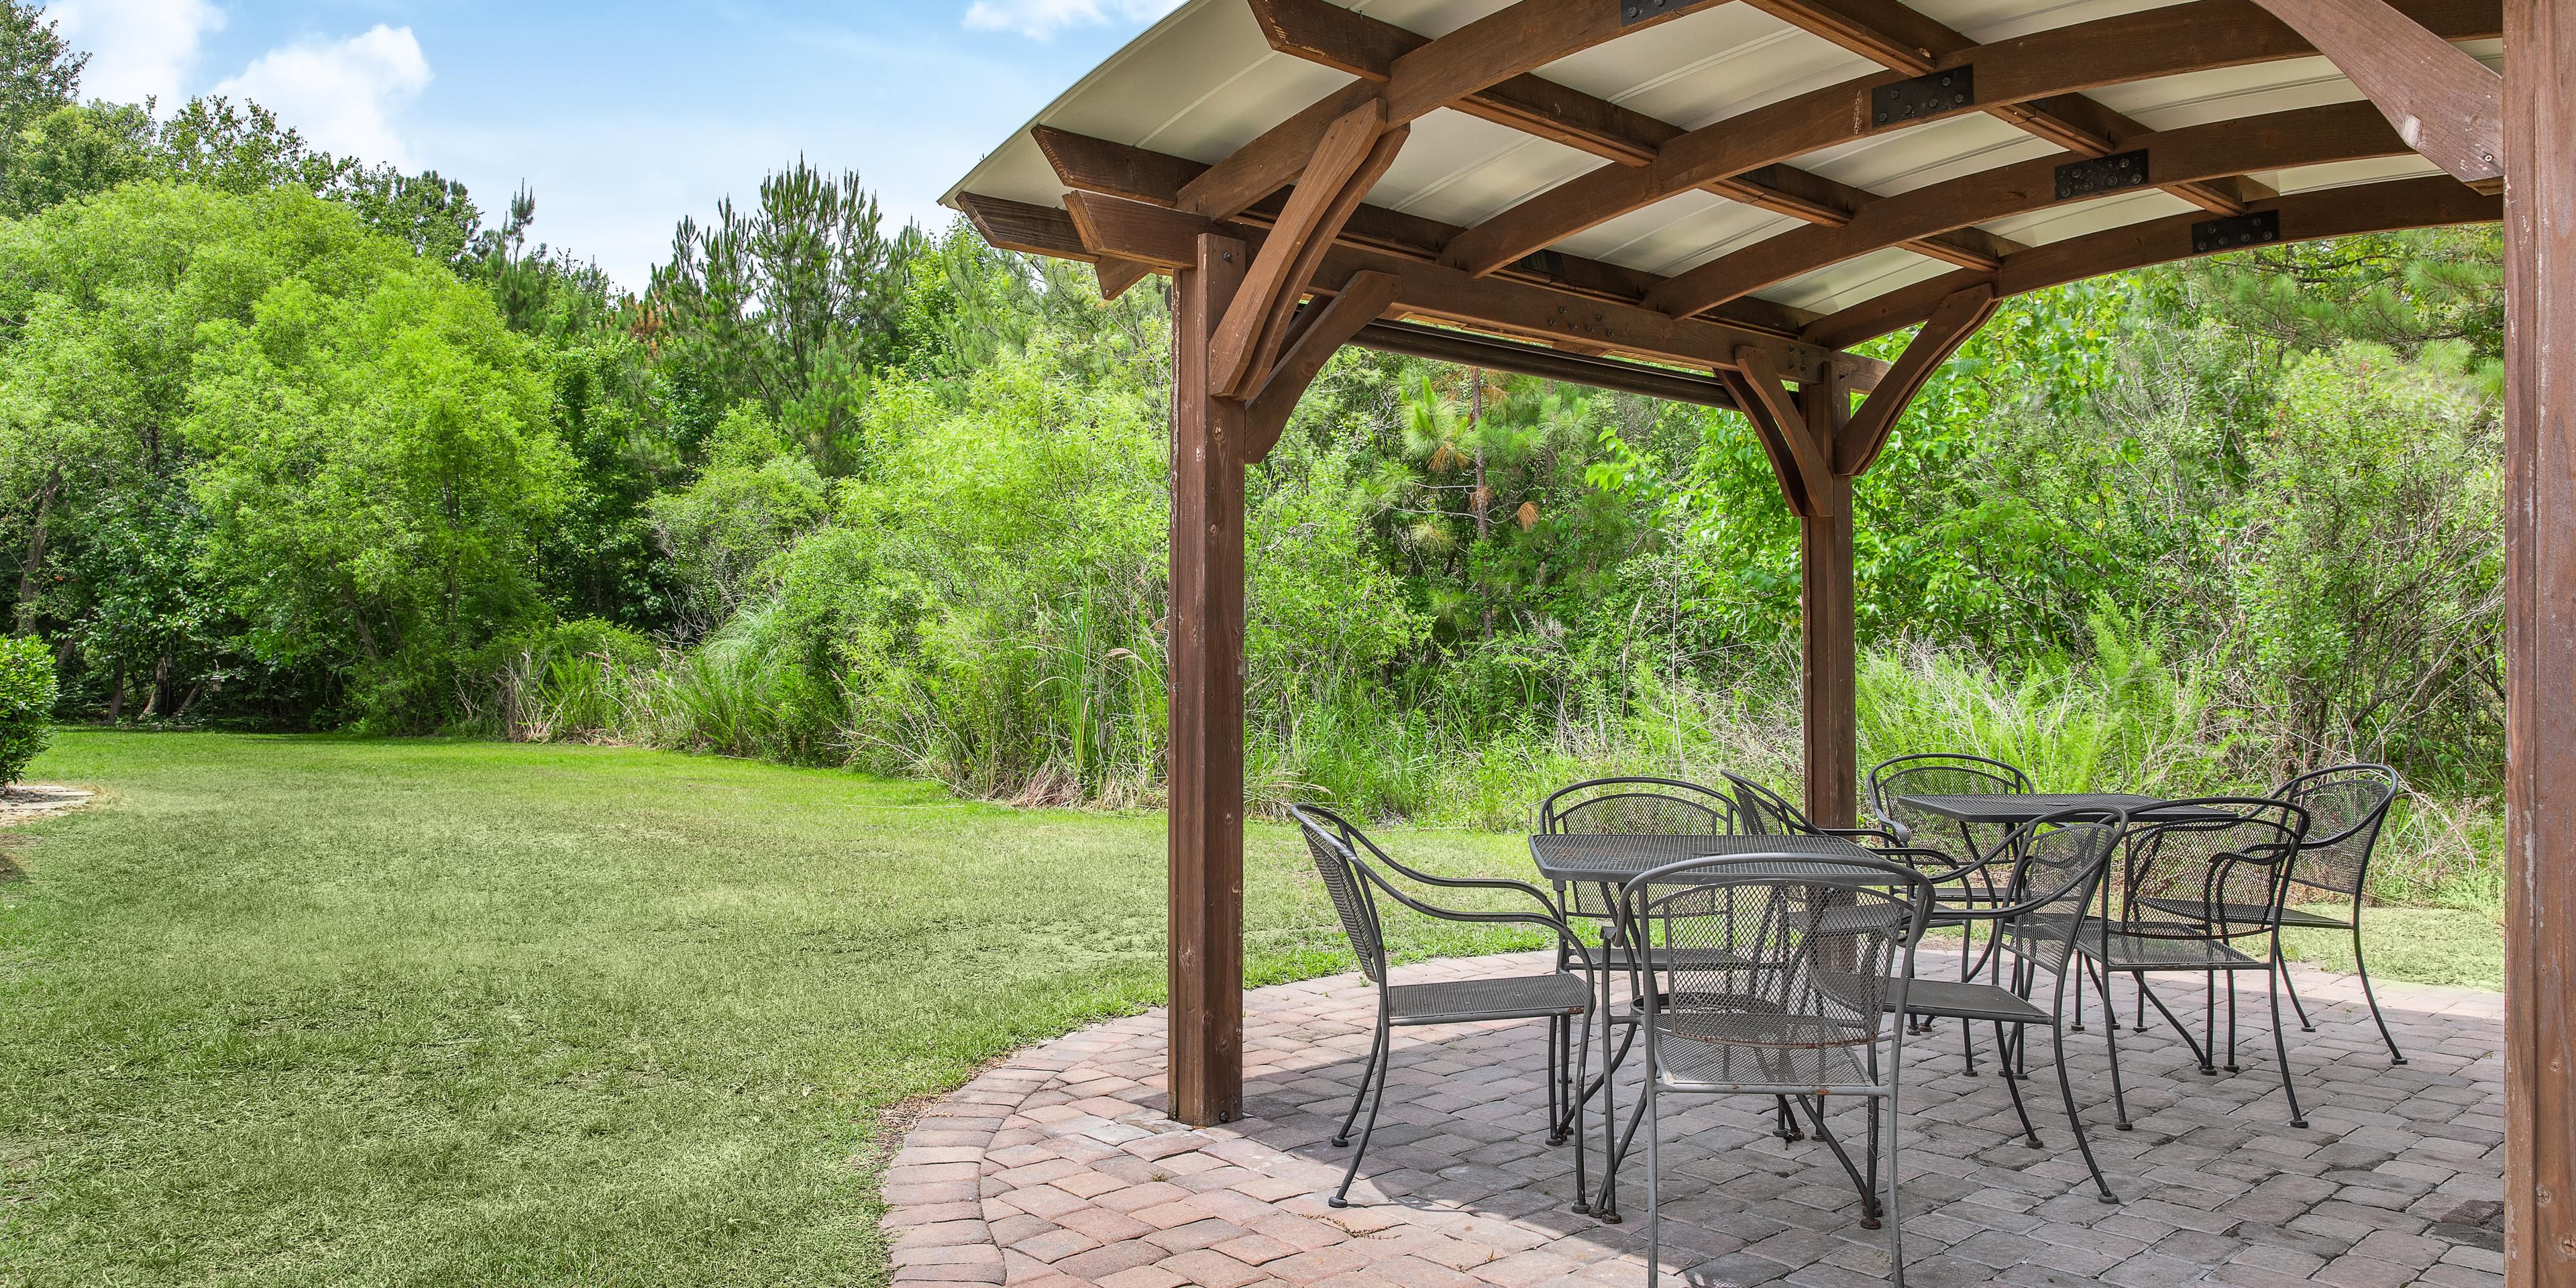 We have the perfect spot for you to relax after a long day of traveling or working! Enjoy our picnic area or our gazebo and let the worries of the day just melt away! Another great reason to stay at Holiday Inn Express & Suites Hardeeville-Hilton Head.